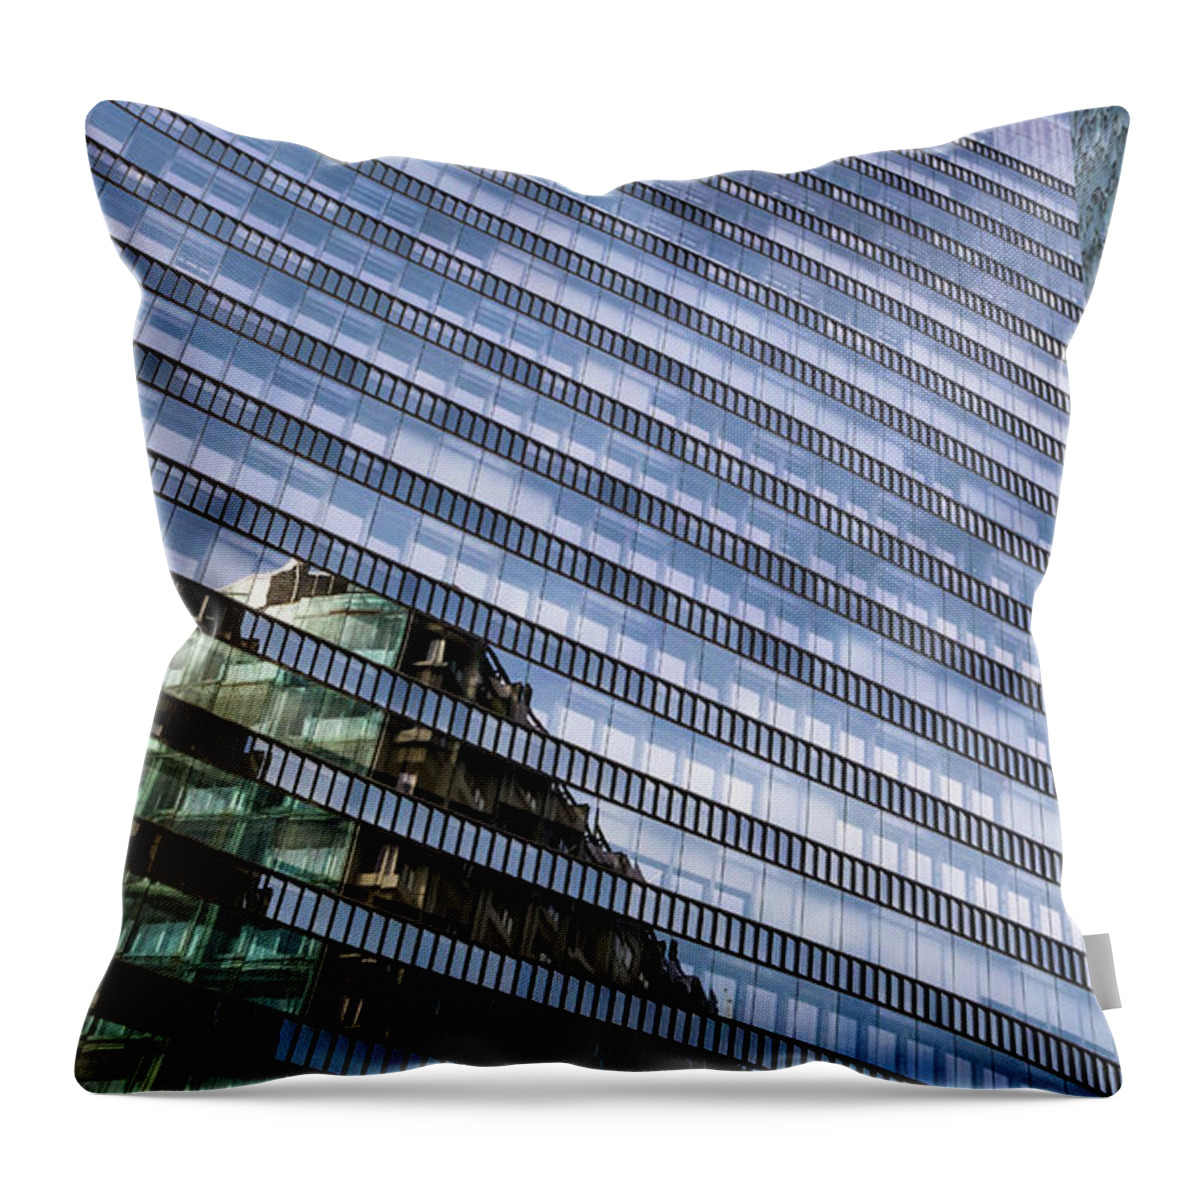 Accommodation Throw Pillow featuring the photograph Glass Facade Of Modern Office Buildings by Andreas Berthold